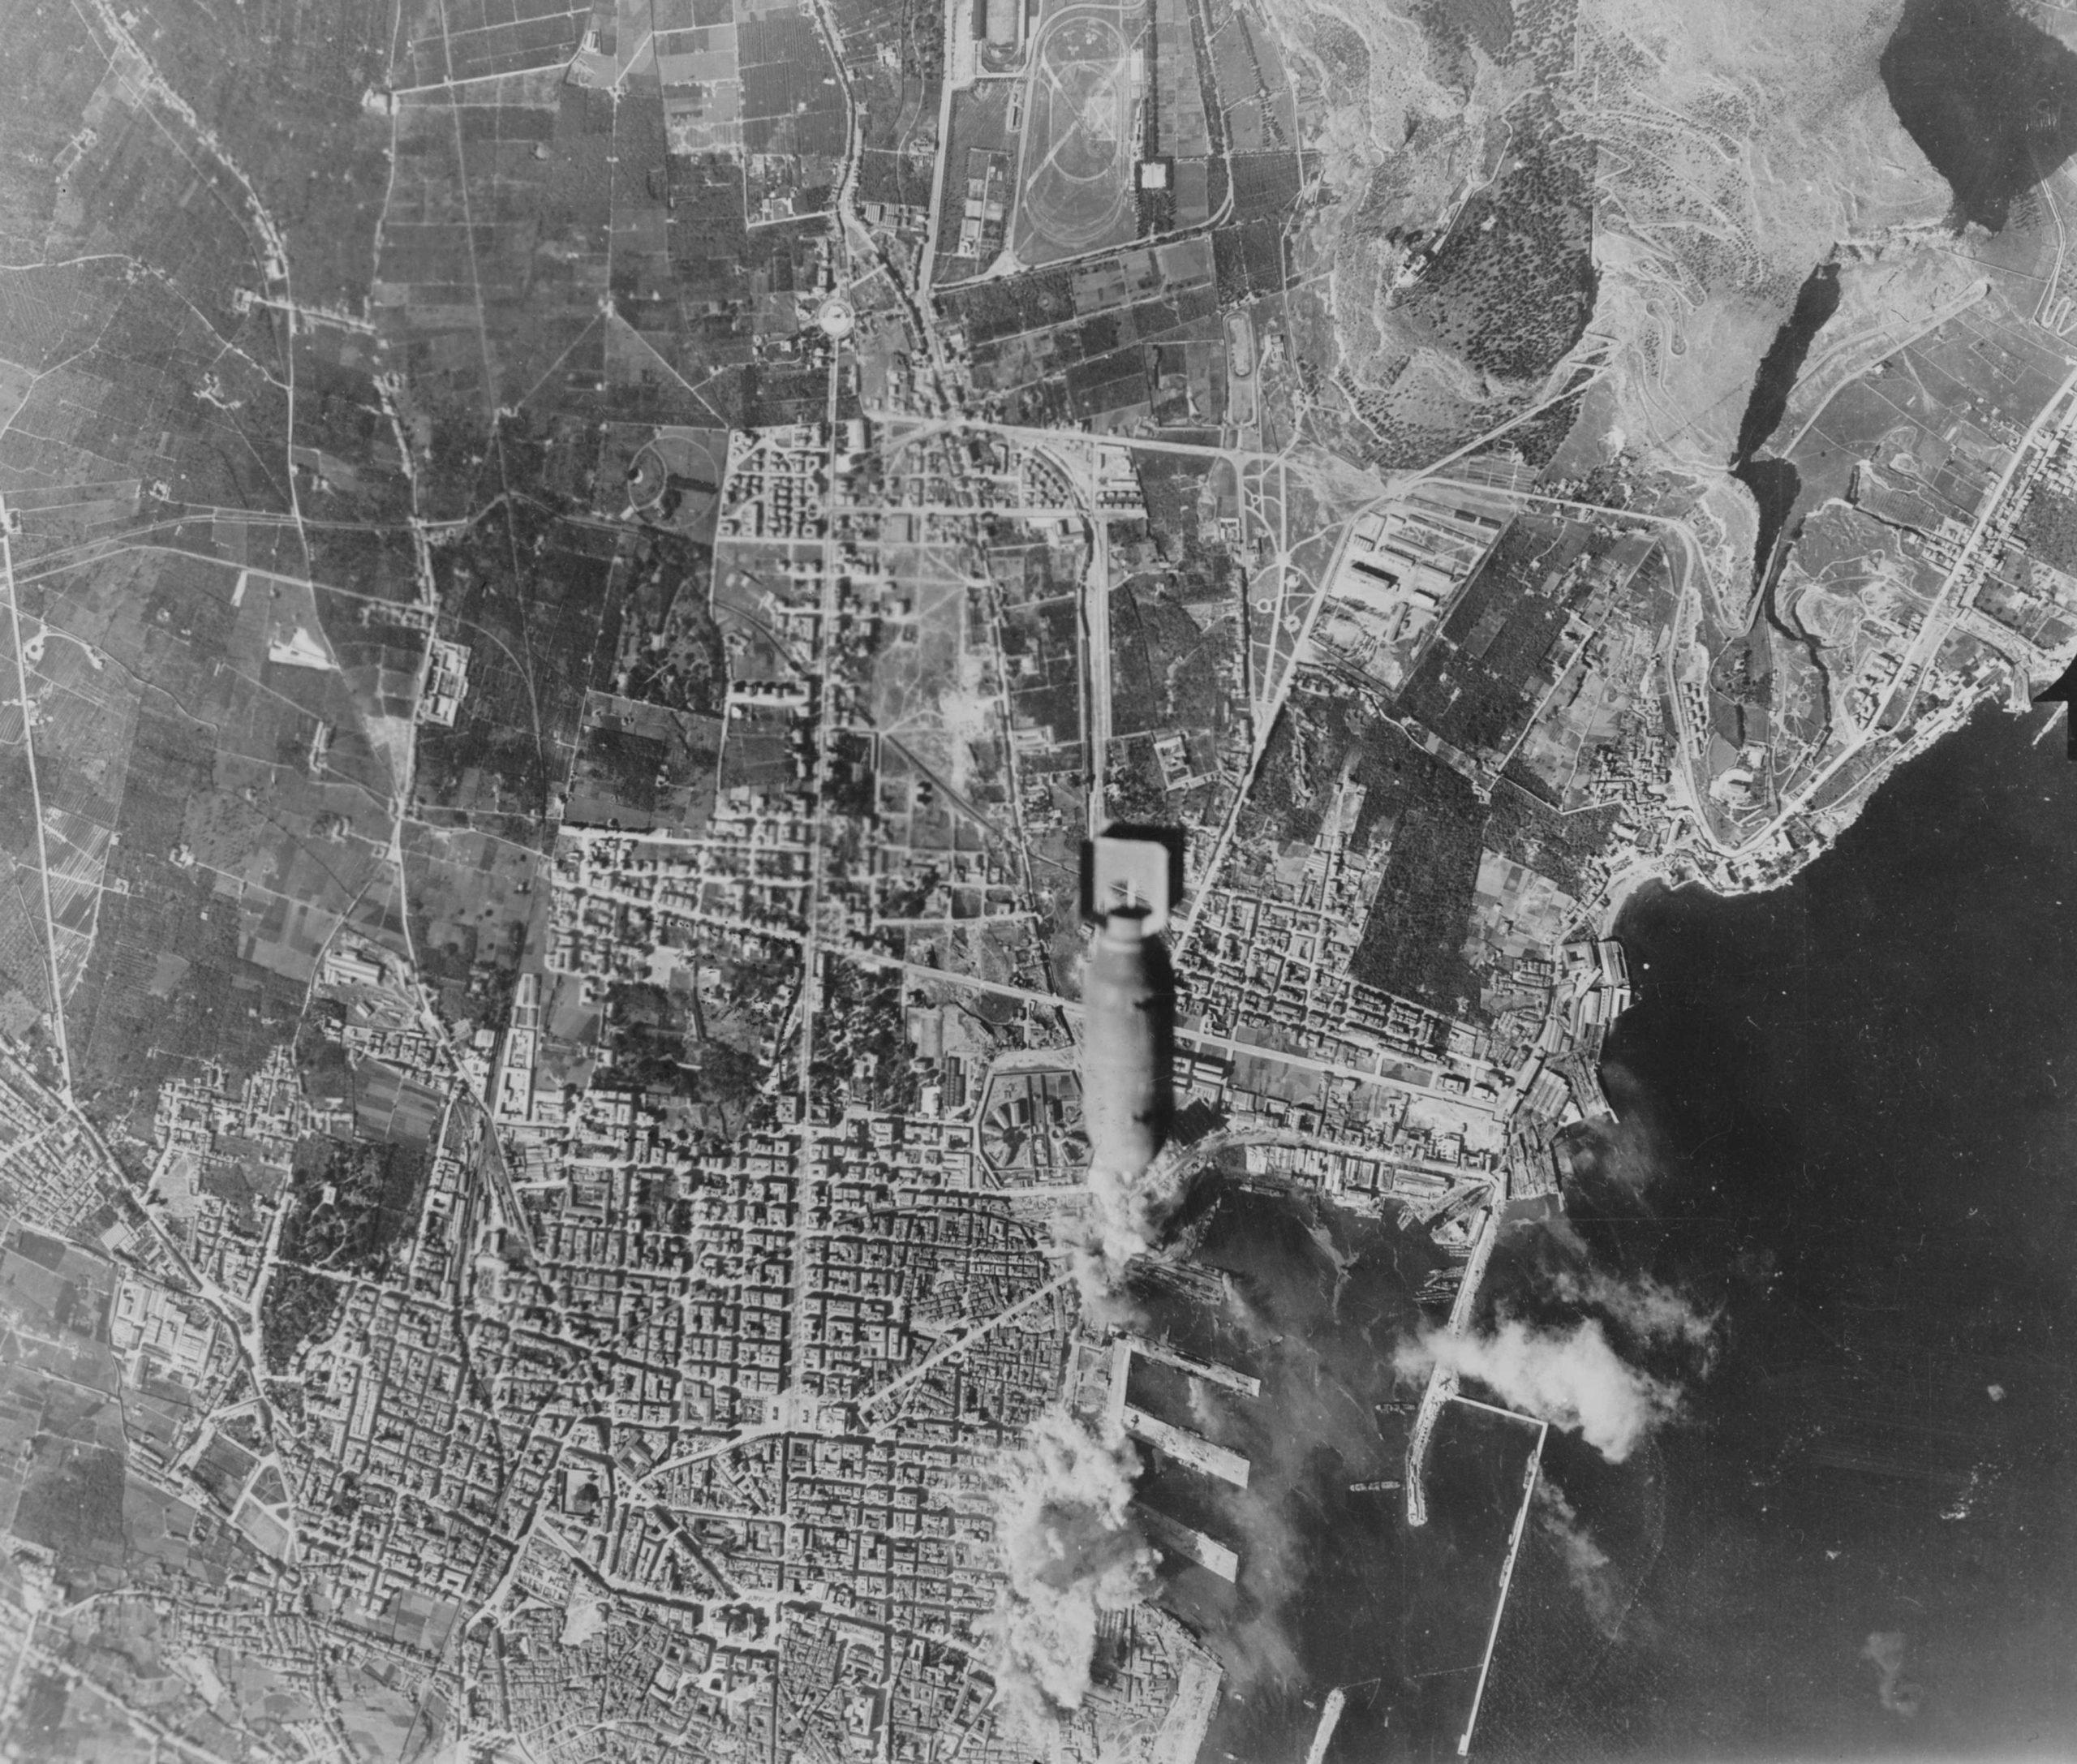 Aerial view of the bombing of the harbor of the Italian city of Palermo